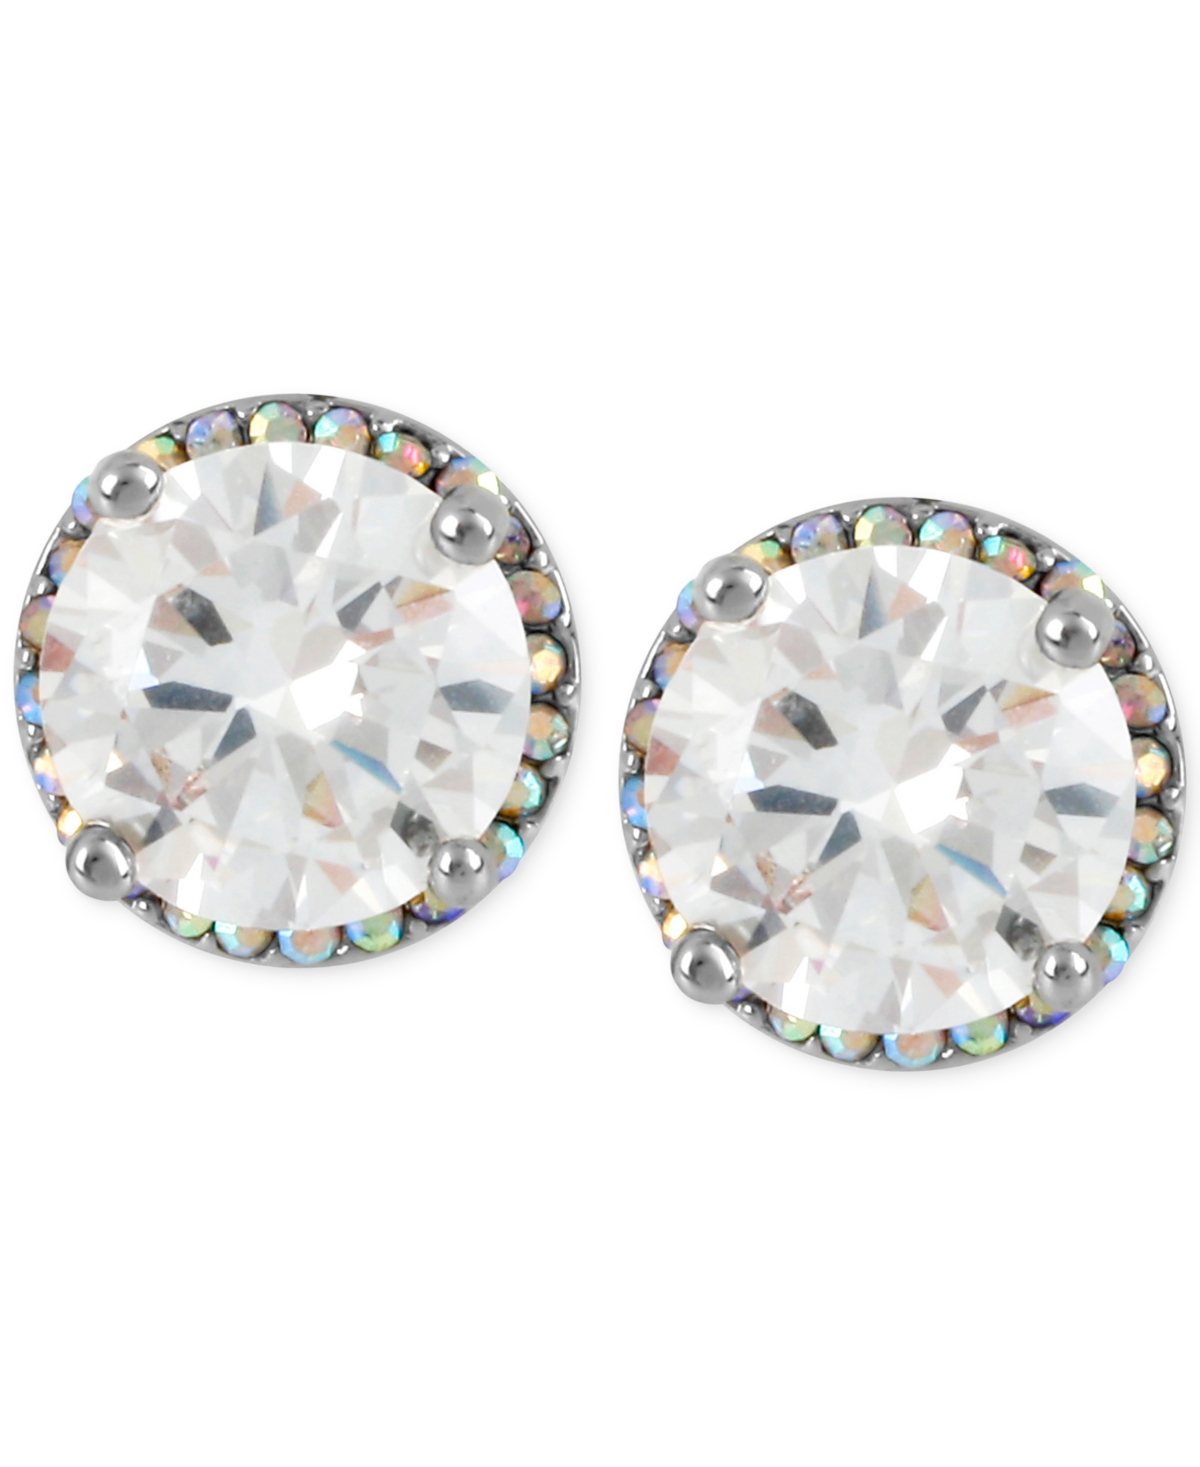 Silver-Tone Crystal Round Stud Earrings - Silver